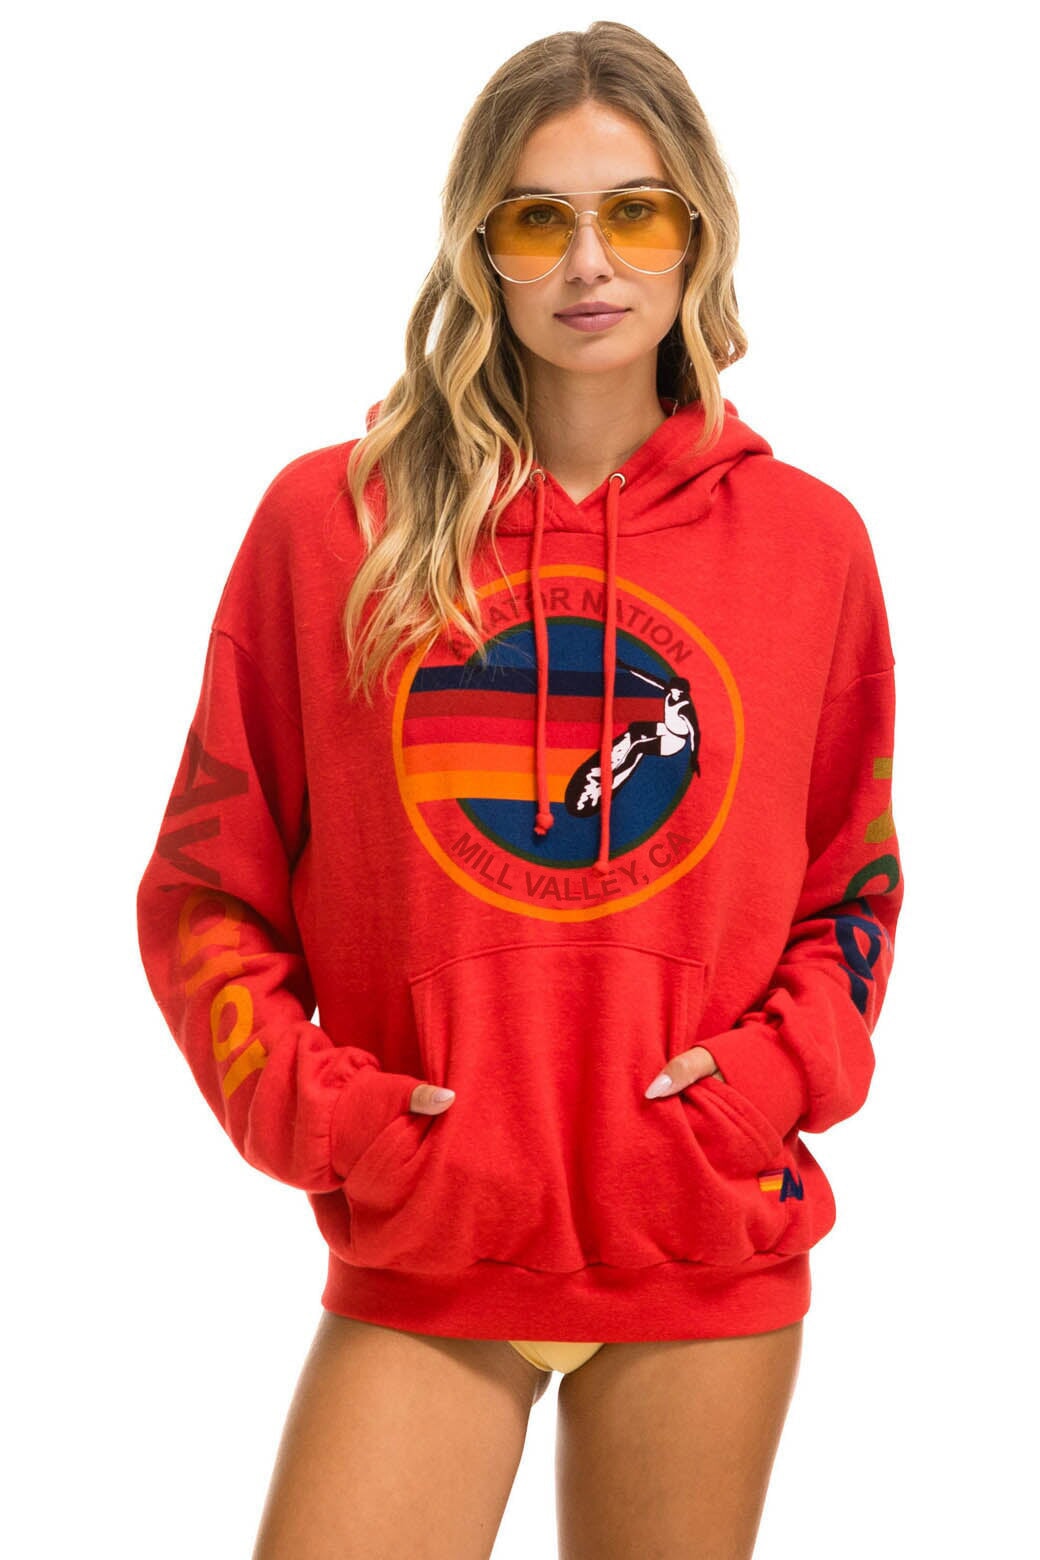 AVIATOR NATION MILL VALLEY RELAXED PULLOVER HOODIE - RED Hoodie Aviator Nation 